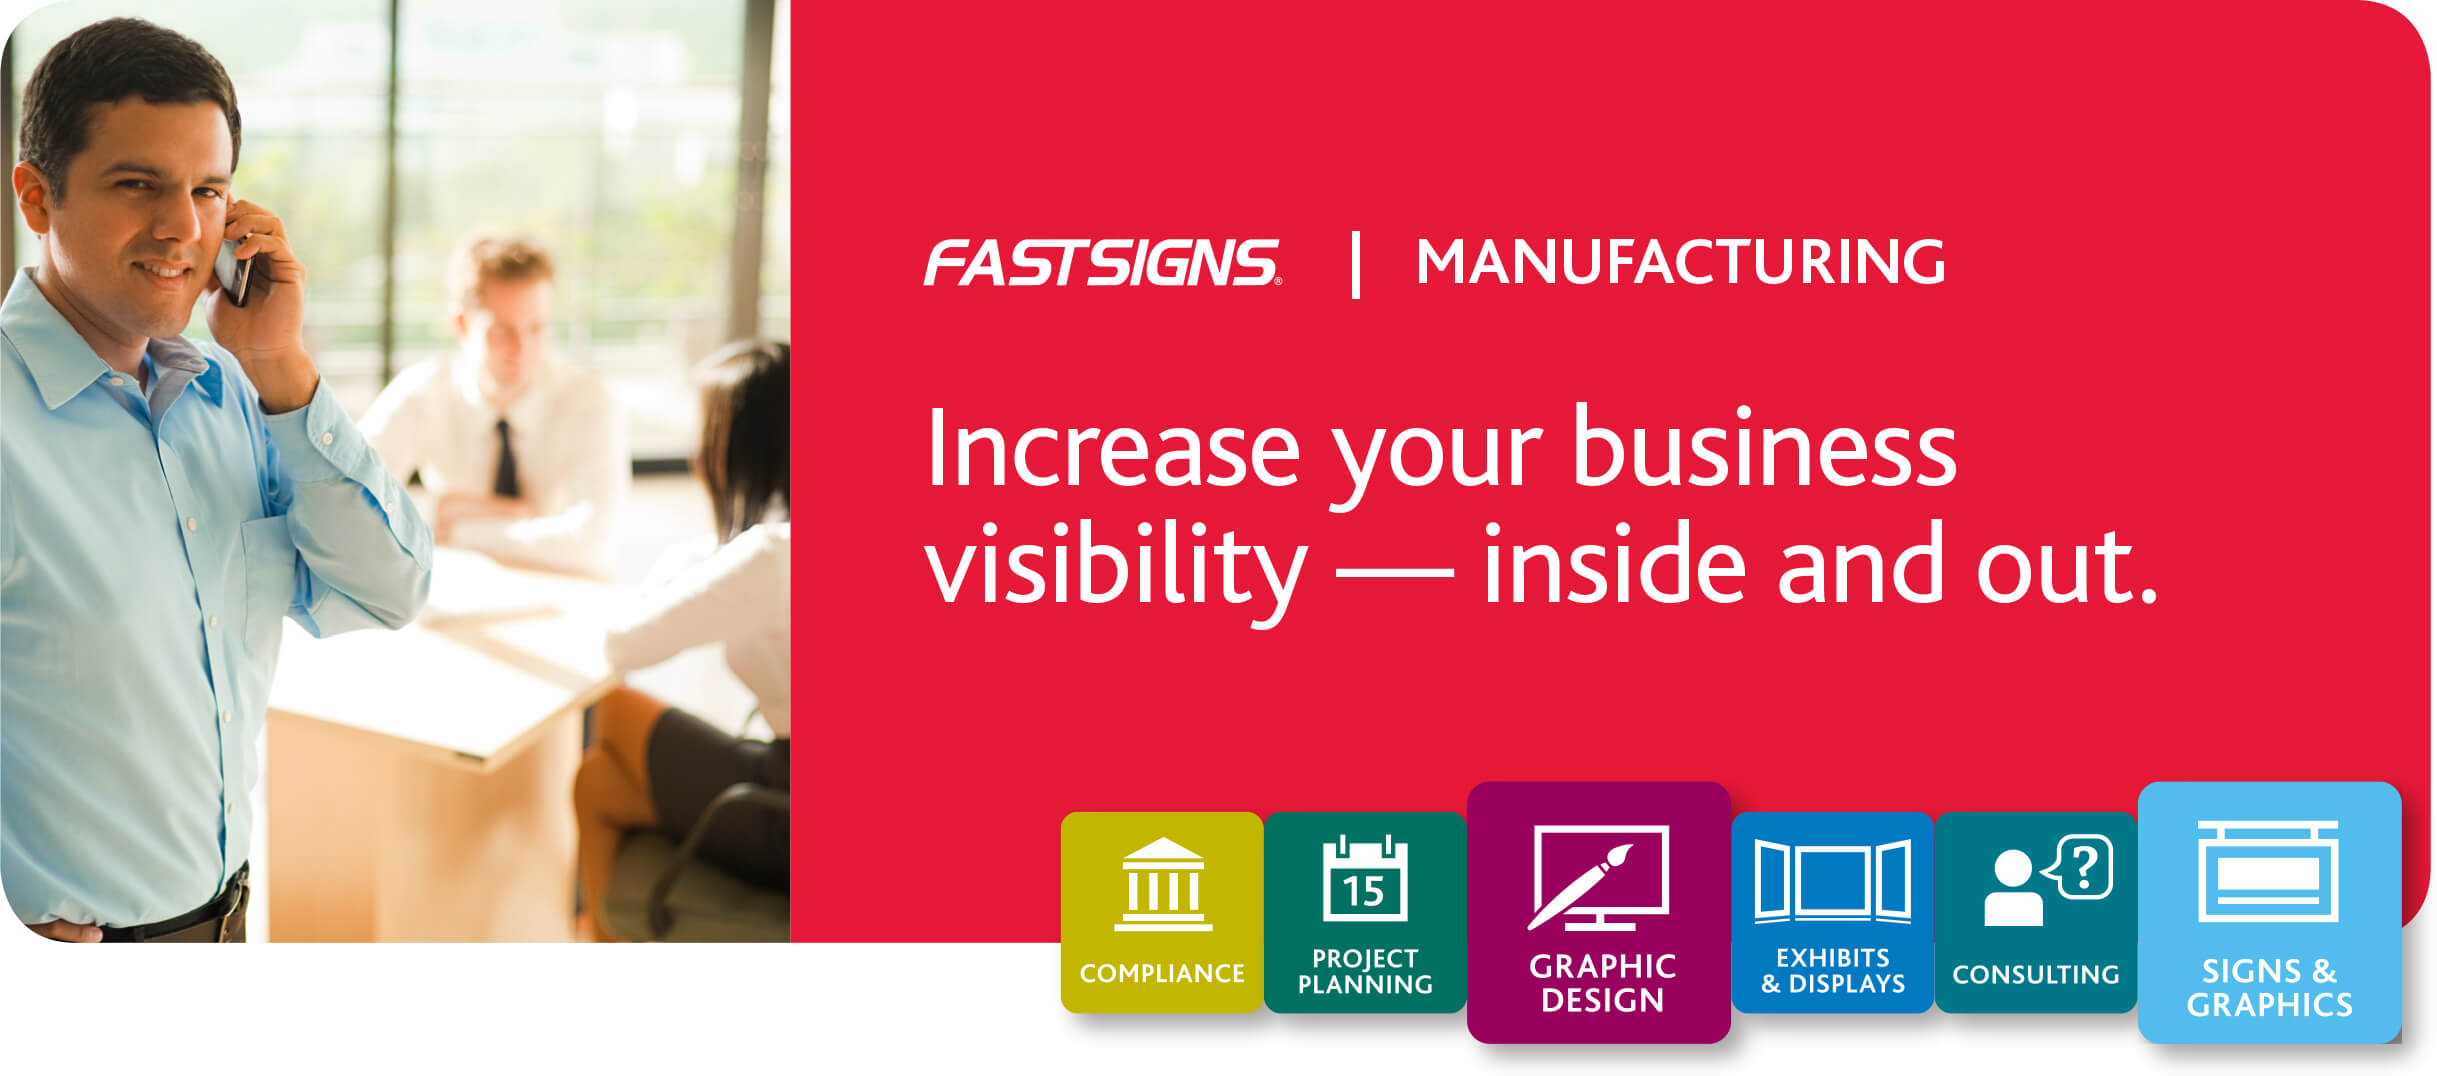 Increase your business visibility - inside and out